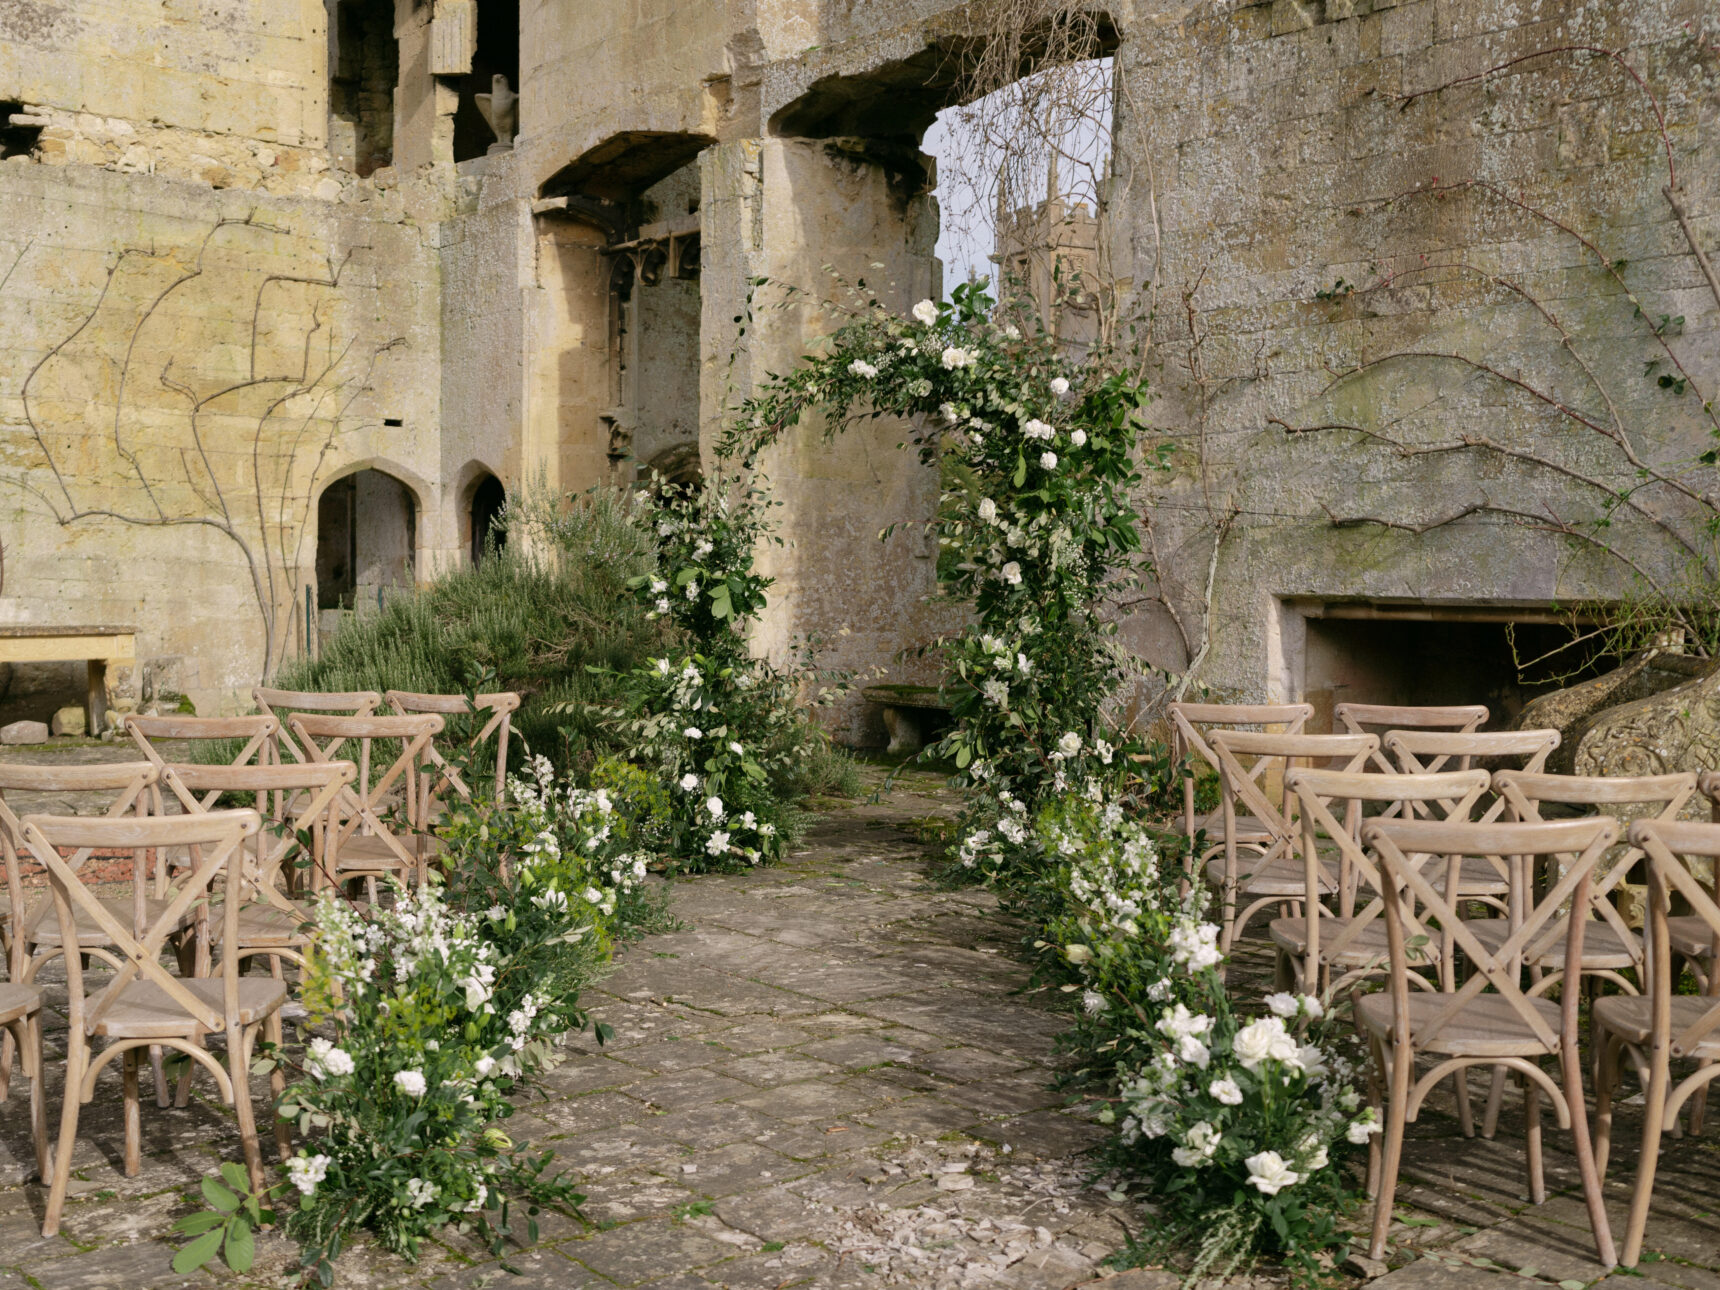 Sudeley offers many ideas for ceremony locations, including the Royal Apartment ruins